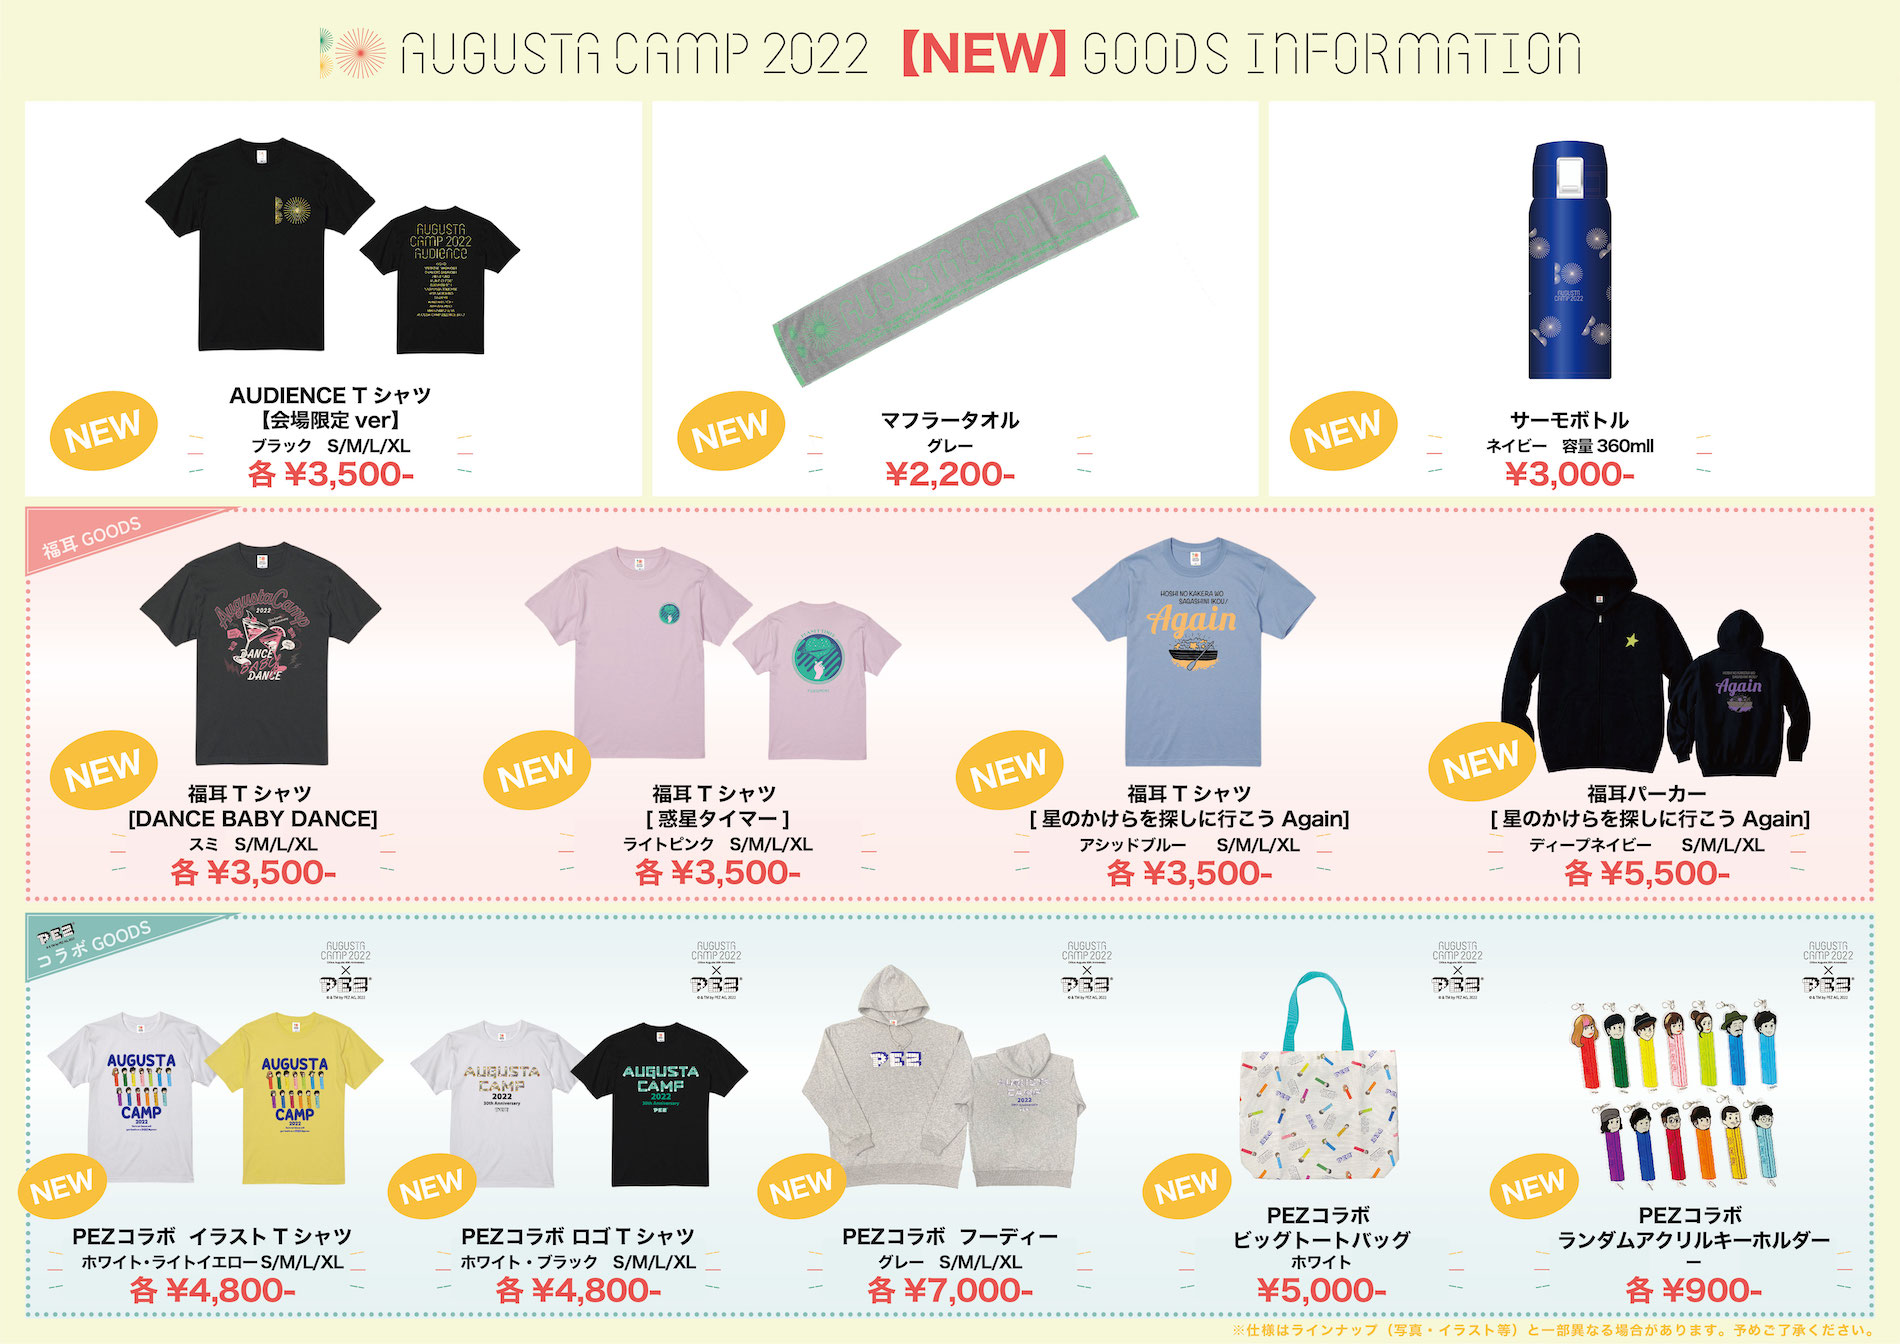 "Augusta Camp 2022" official additional goods announced!